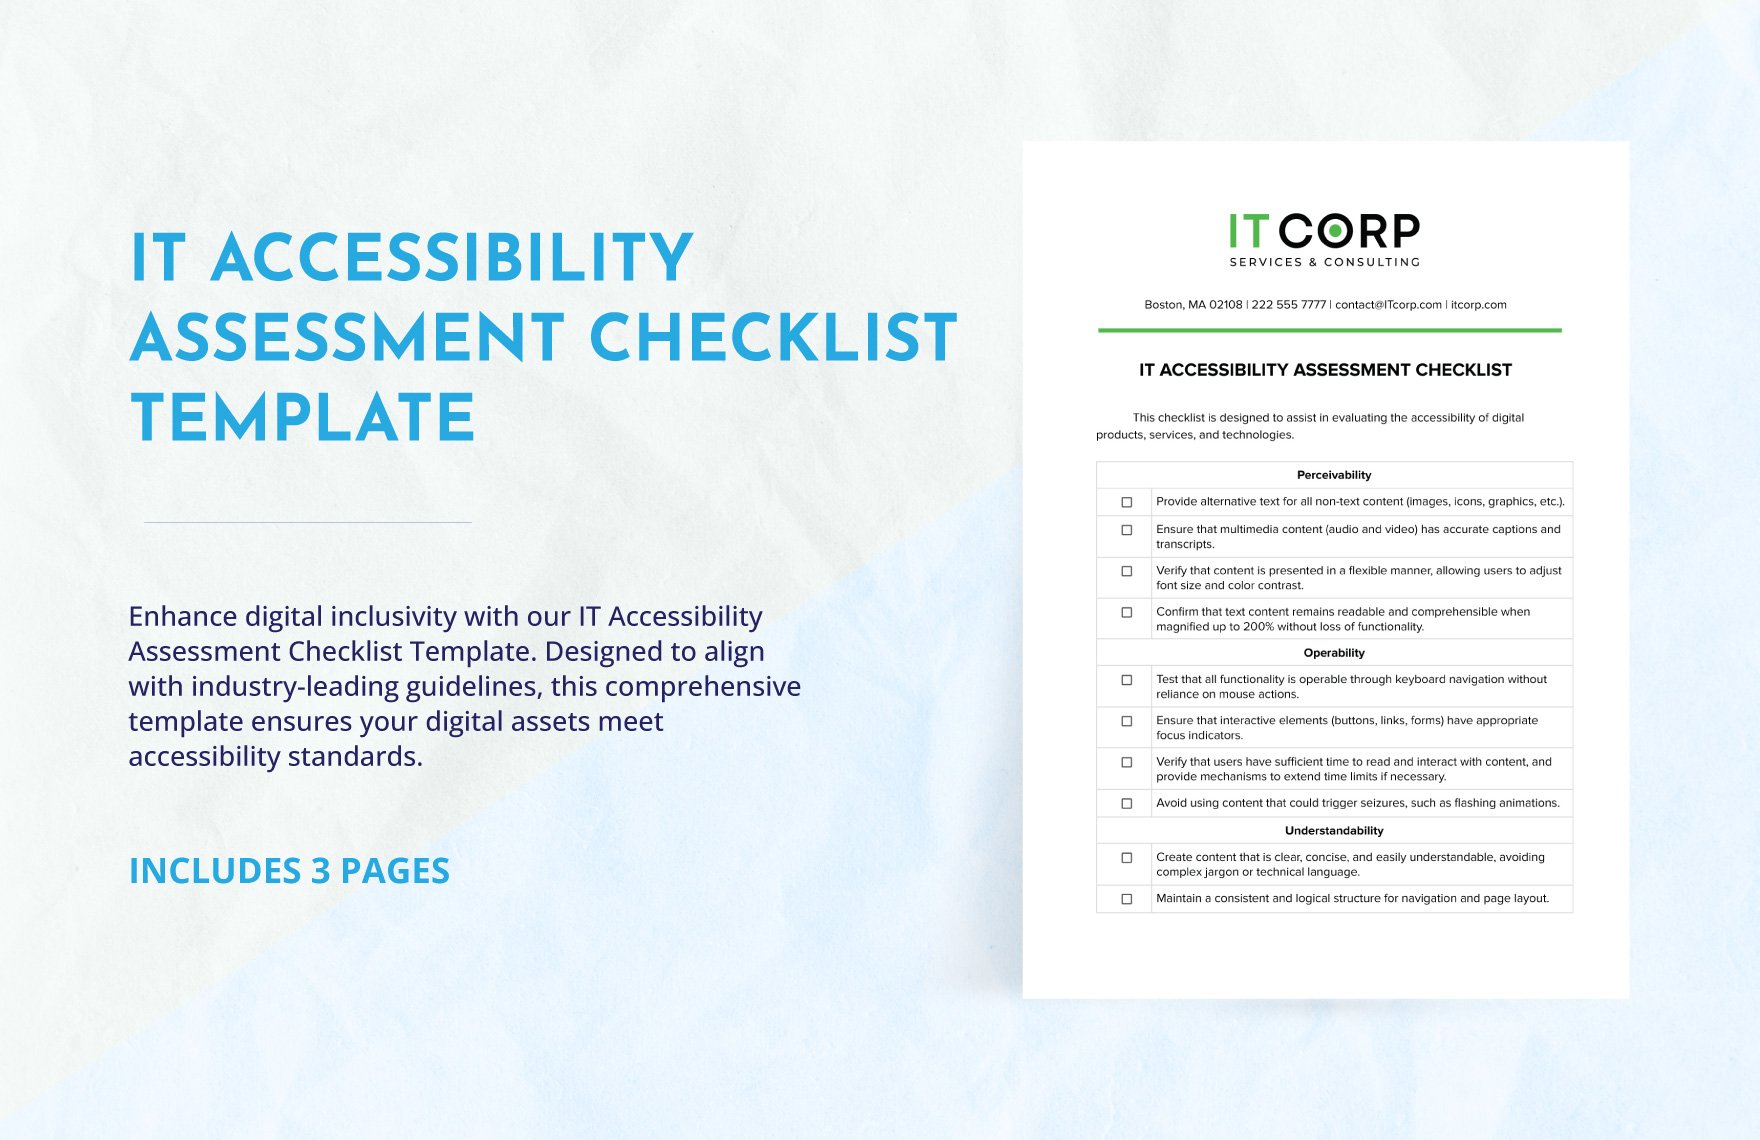 IT Accessibility Assessment Checklist Template in Word, Google Docs, PDF